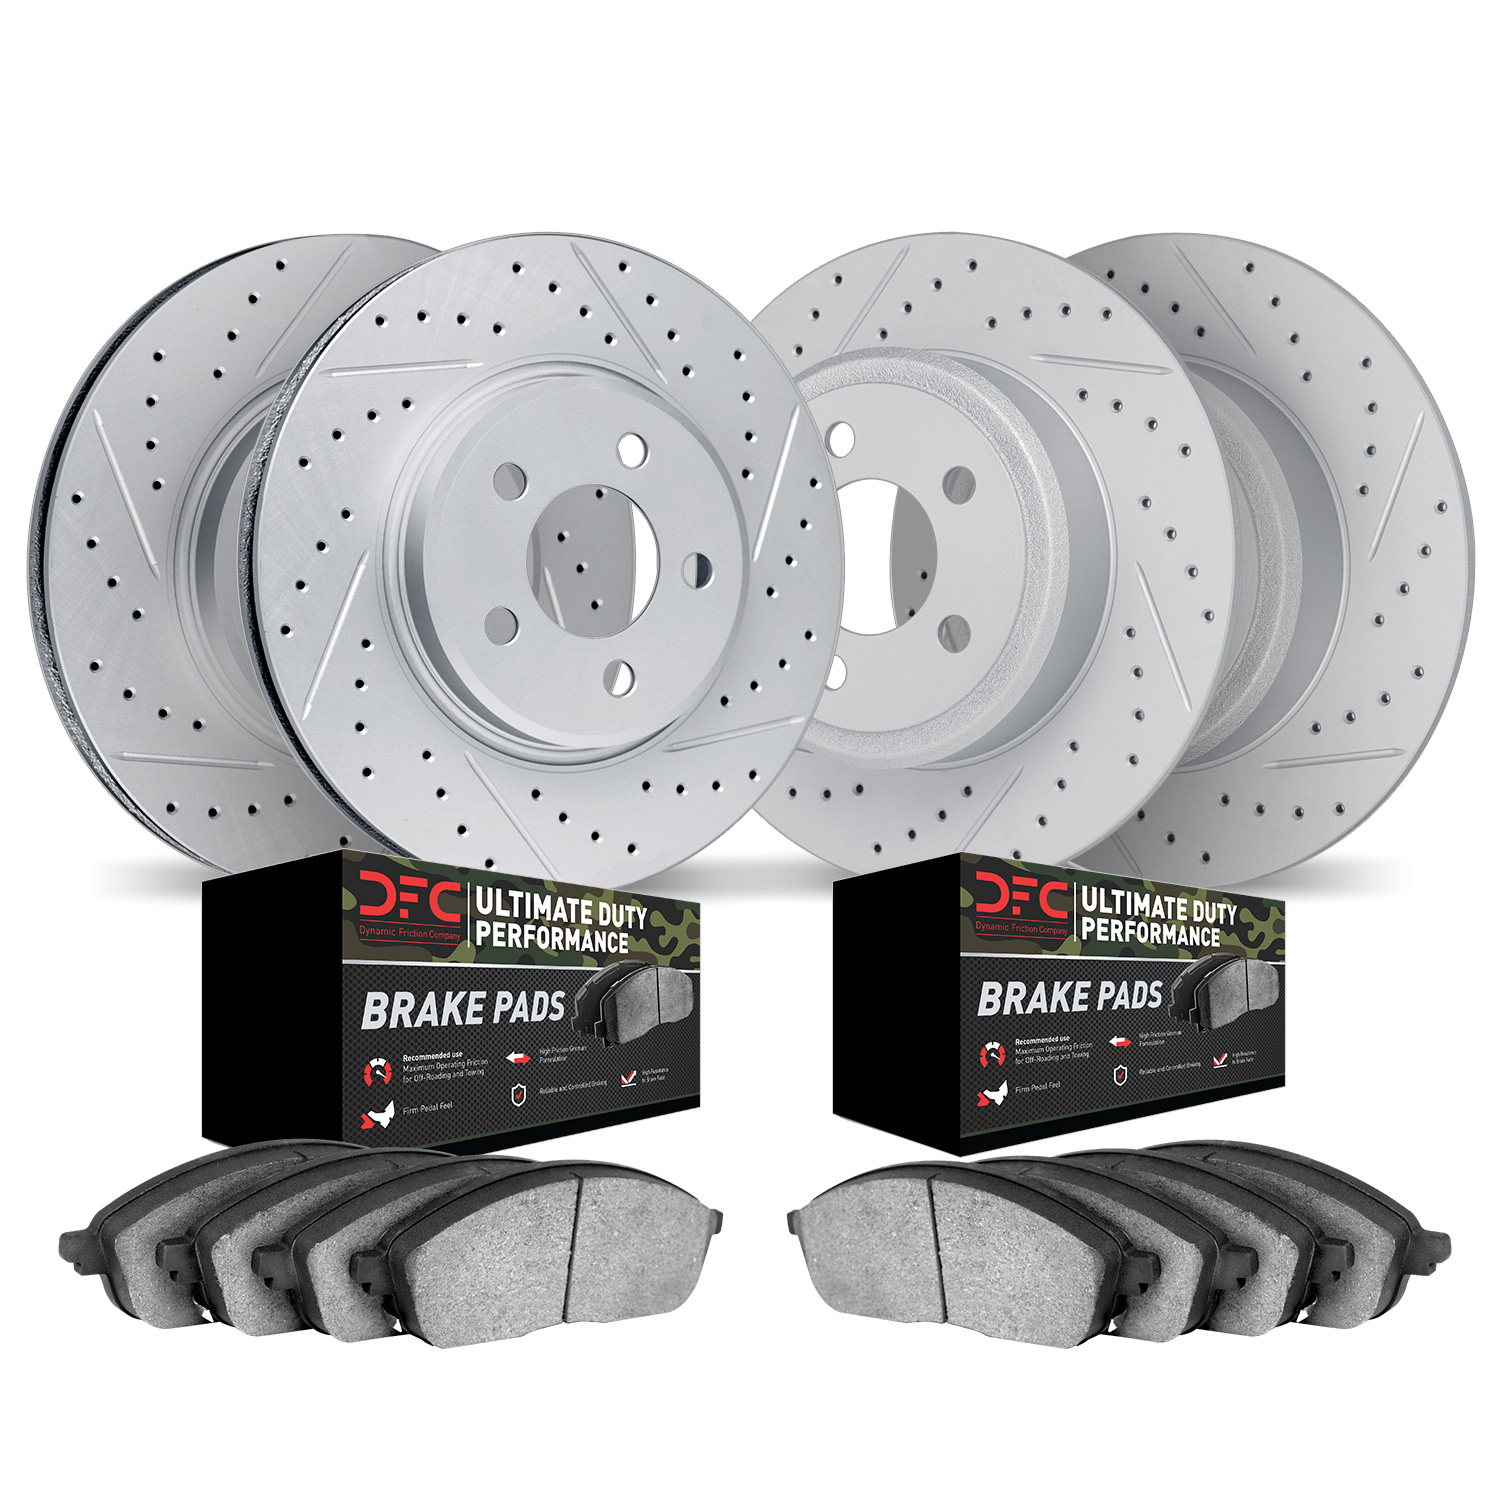 2404-54018 Geoperformance Drilled/Slotted Brake Rotors with Ultimate-Duty Brake Pads Kit, 1999-2004 Ford/Lincoln/Mercury/Mazda,